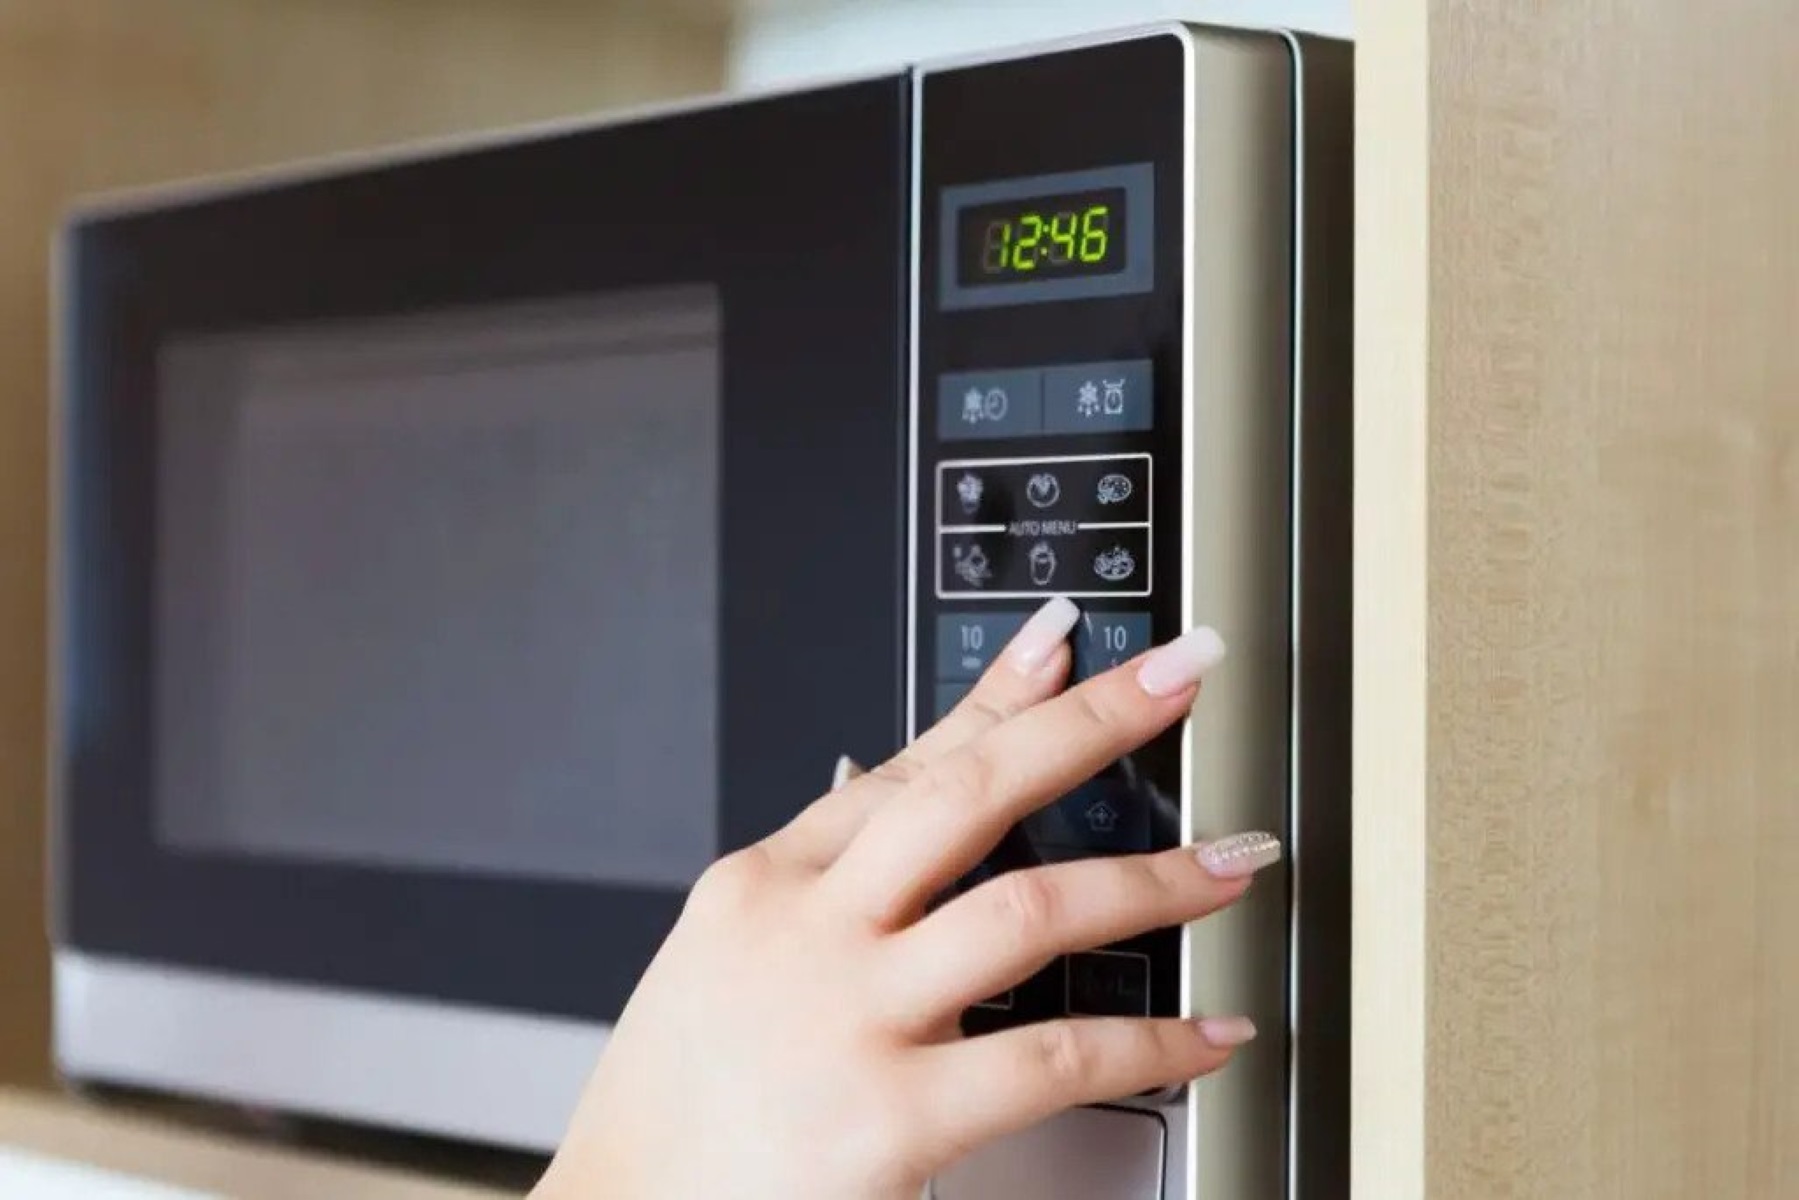 How To Fix The Error Code E-41 For Samsung Microwave